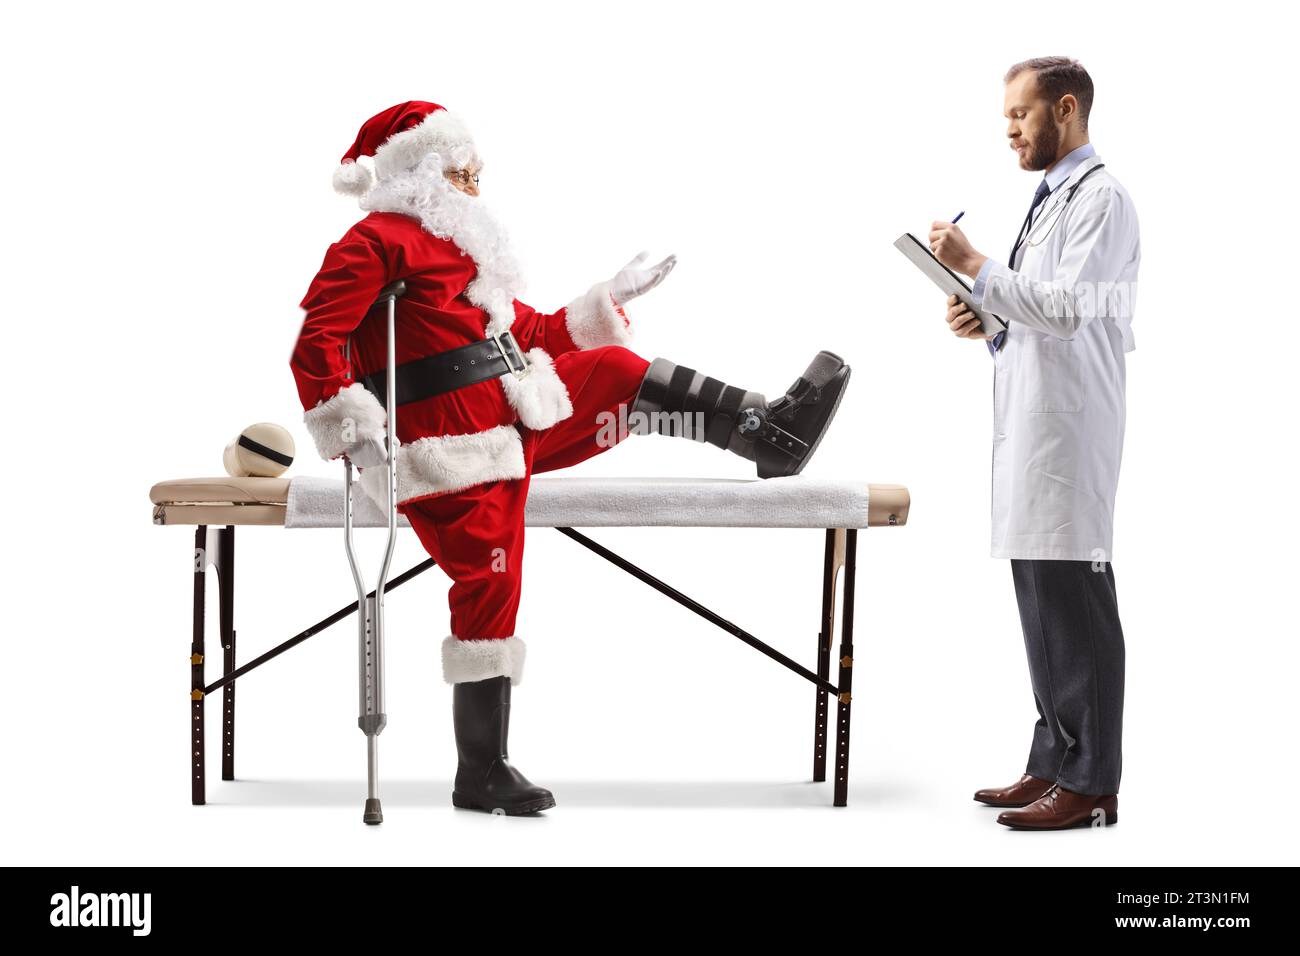 Santa claus with an injured leg talking to a male doctor and sitting on a therapy table isolated on white background Stock Photo